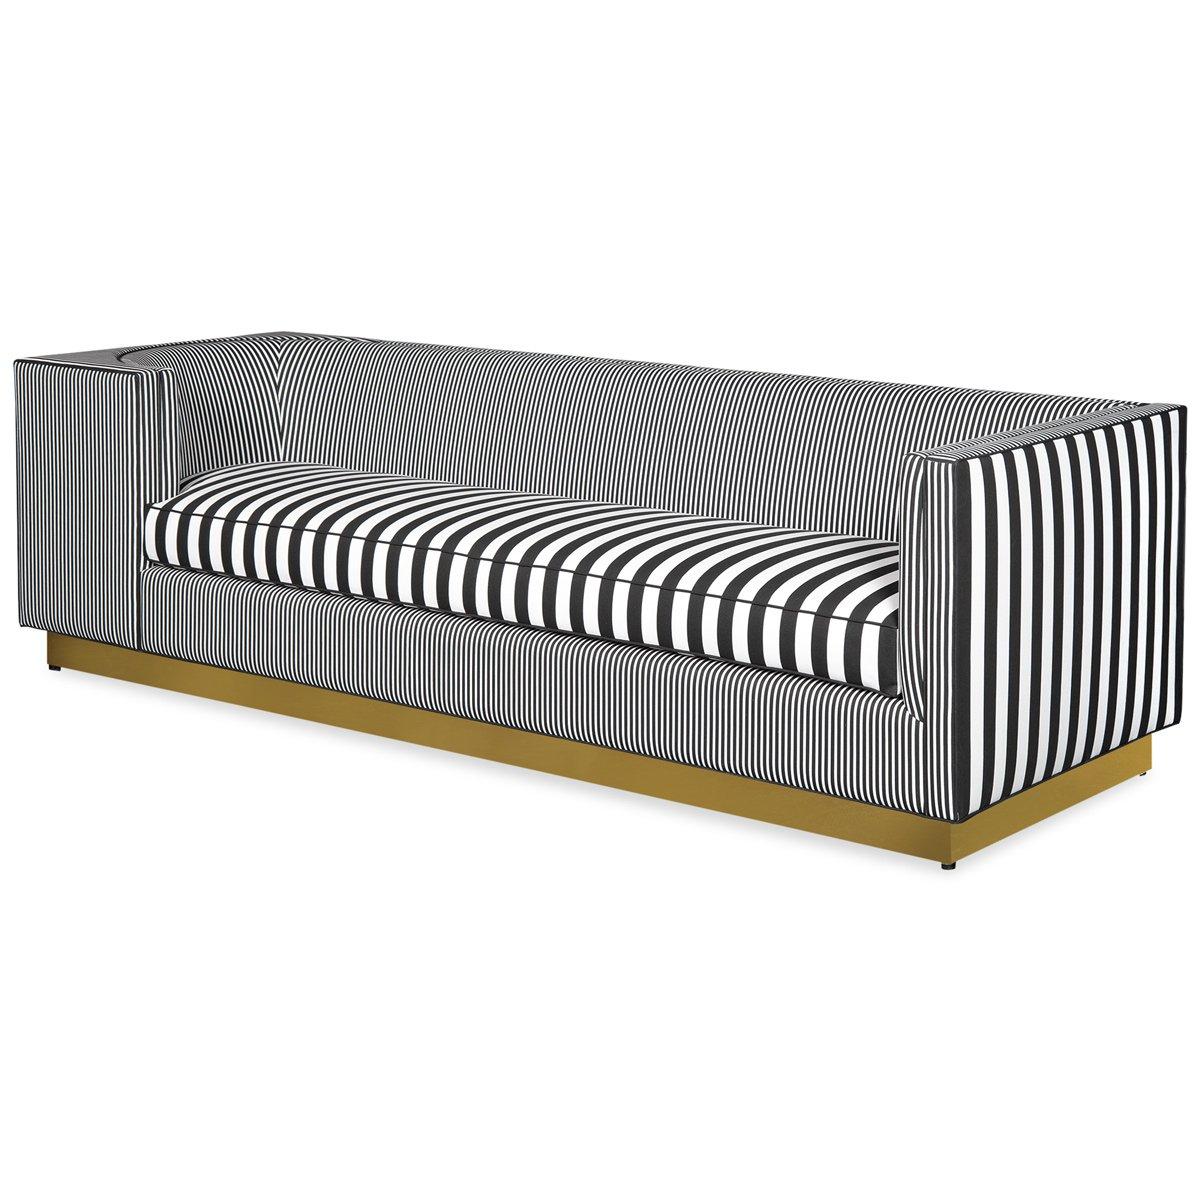 Our Goldfinger sofa in black and white stripes is artistic and sleek. It features an asymmetric interior seat with one arm beautifully curved in contrast to the other arm. Sitting atop a 4